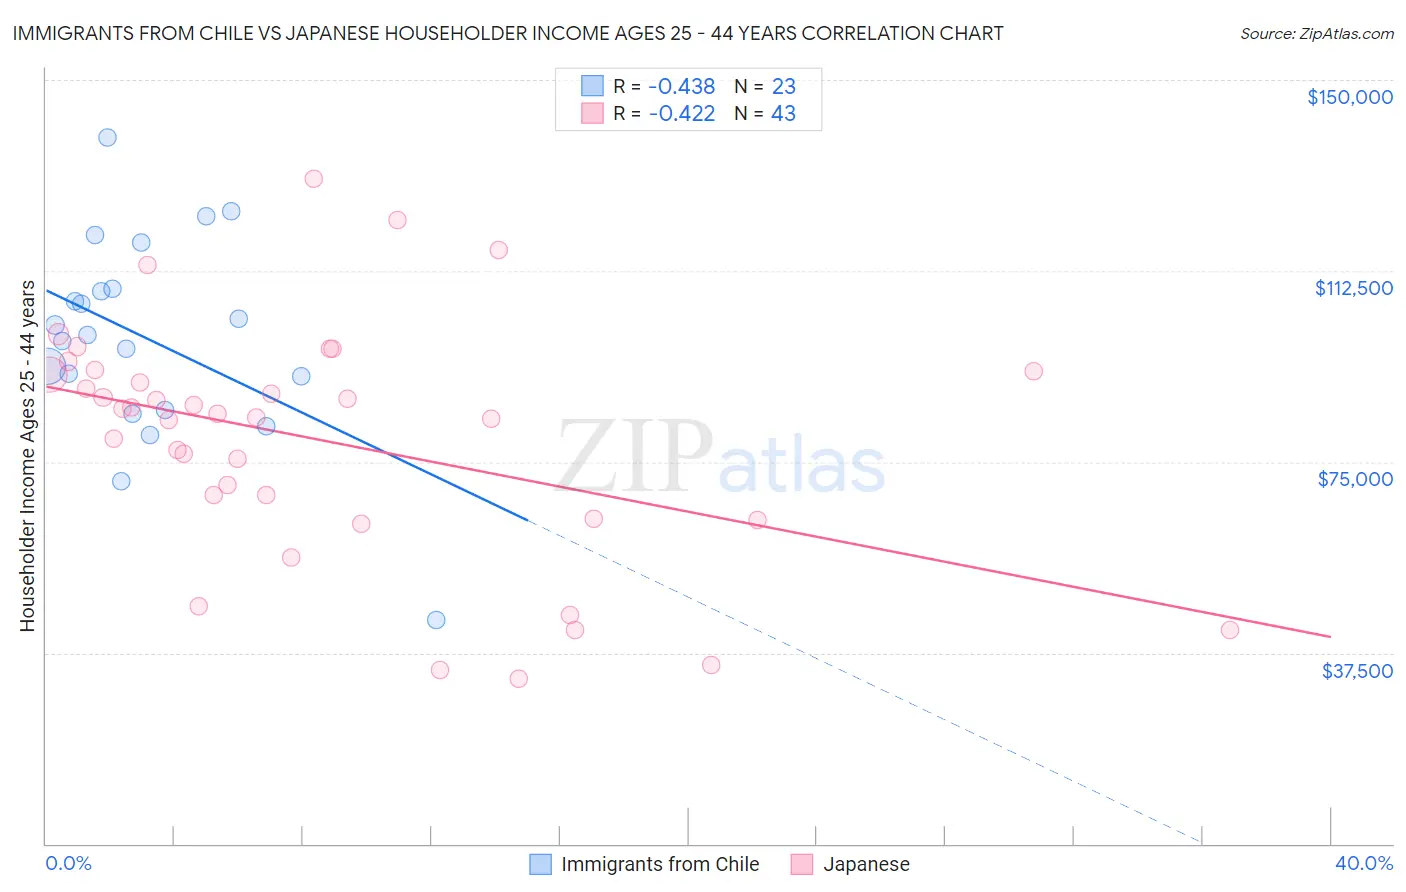 Immigrants from Chile vs Japanese Householder Income Ages 25 - 44 years